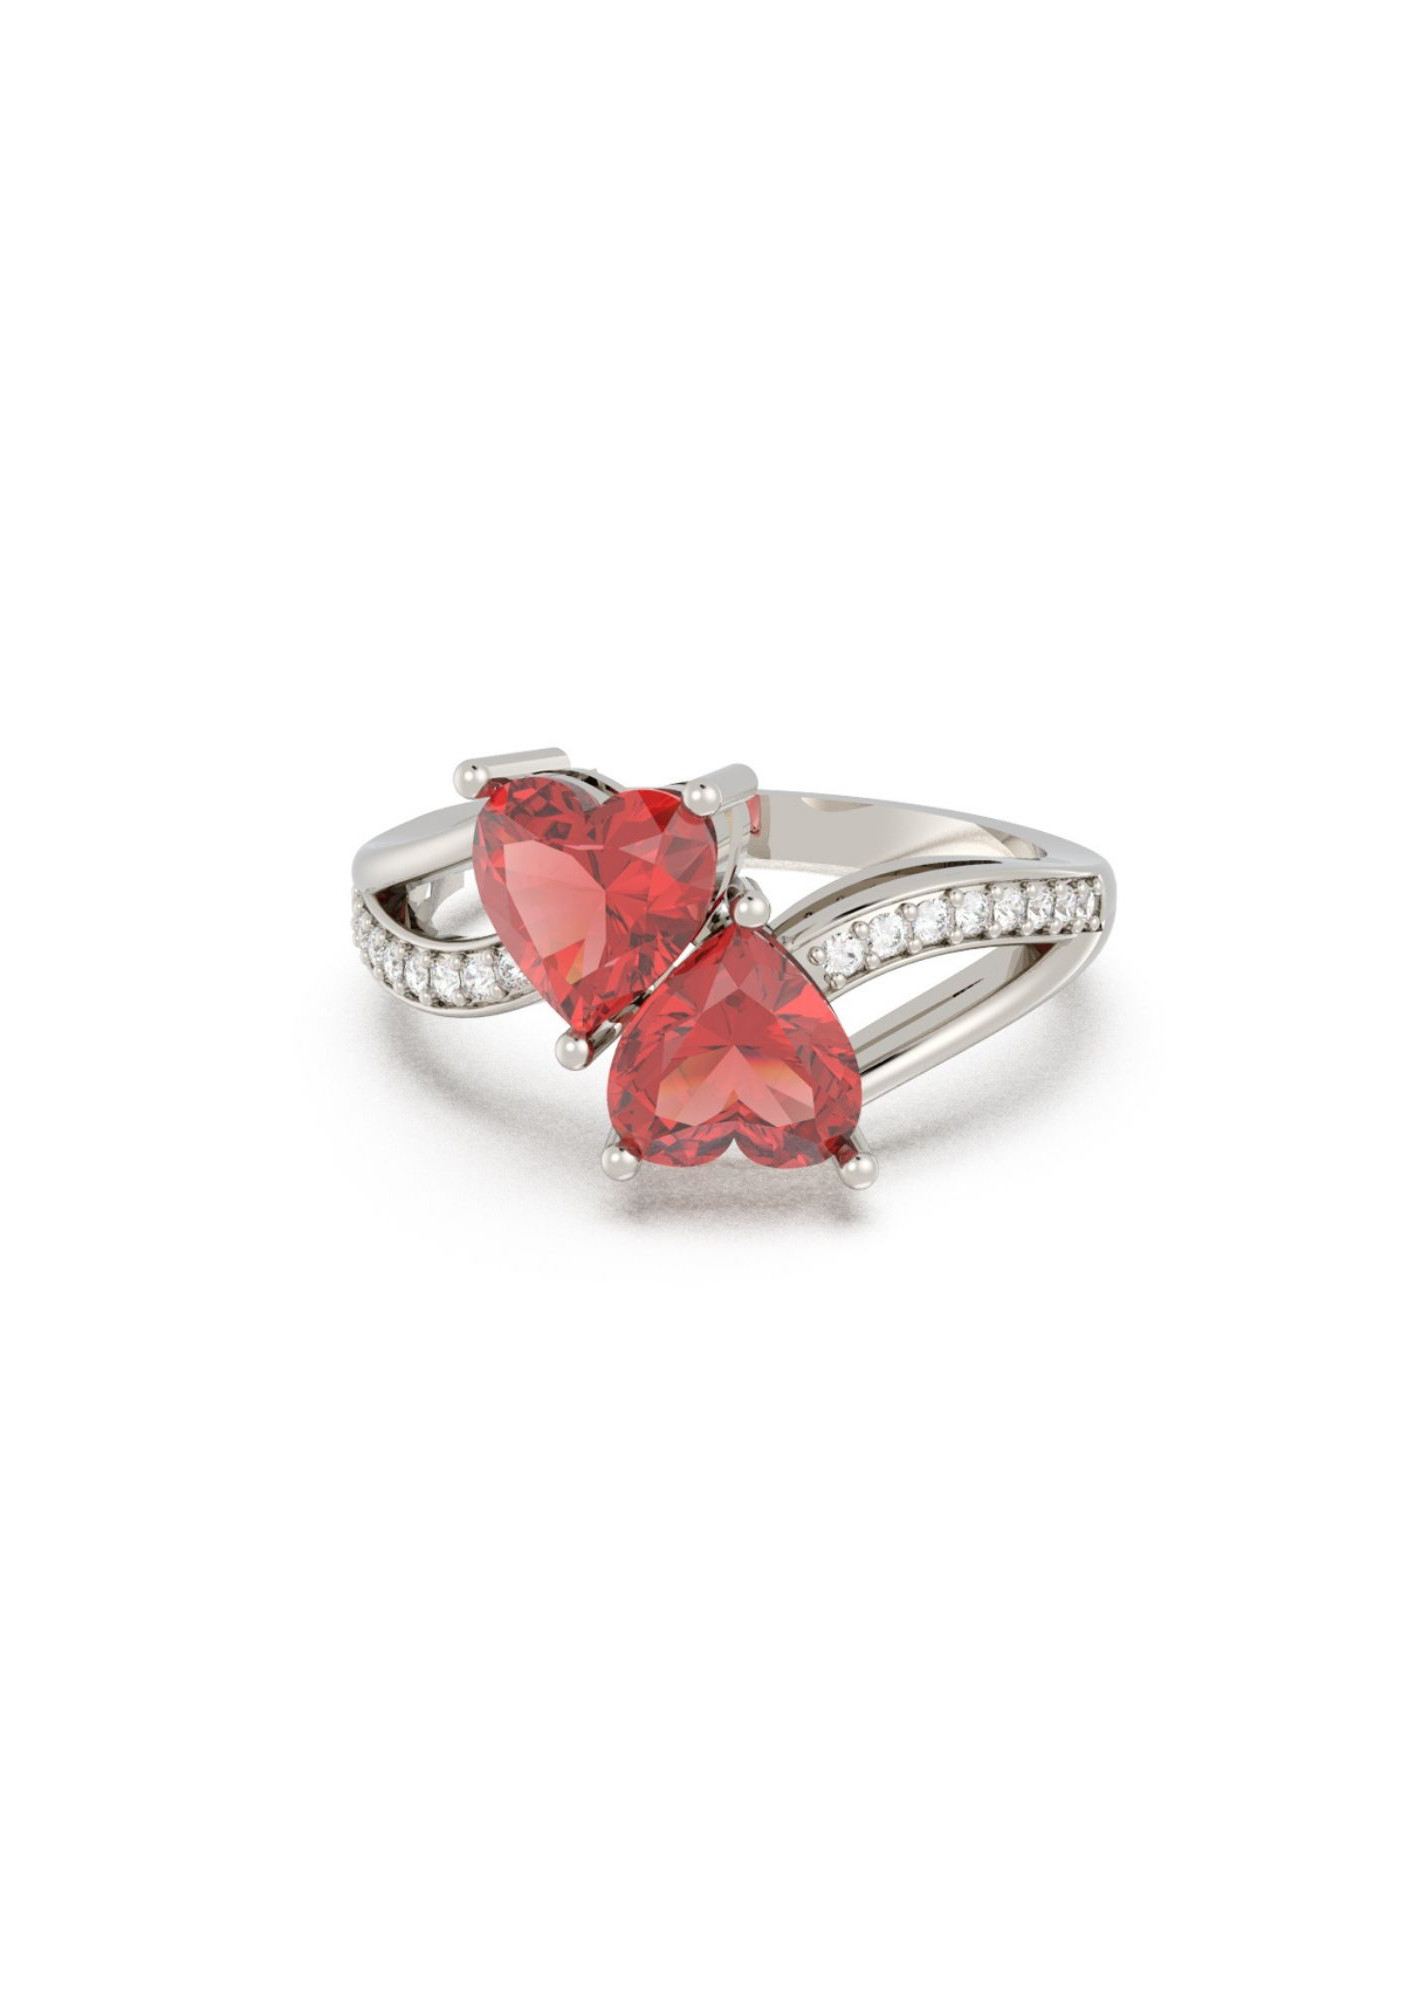 Red Heart Ring in 925 Silver